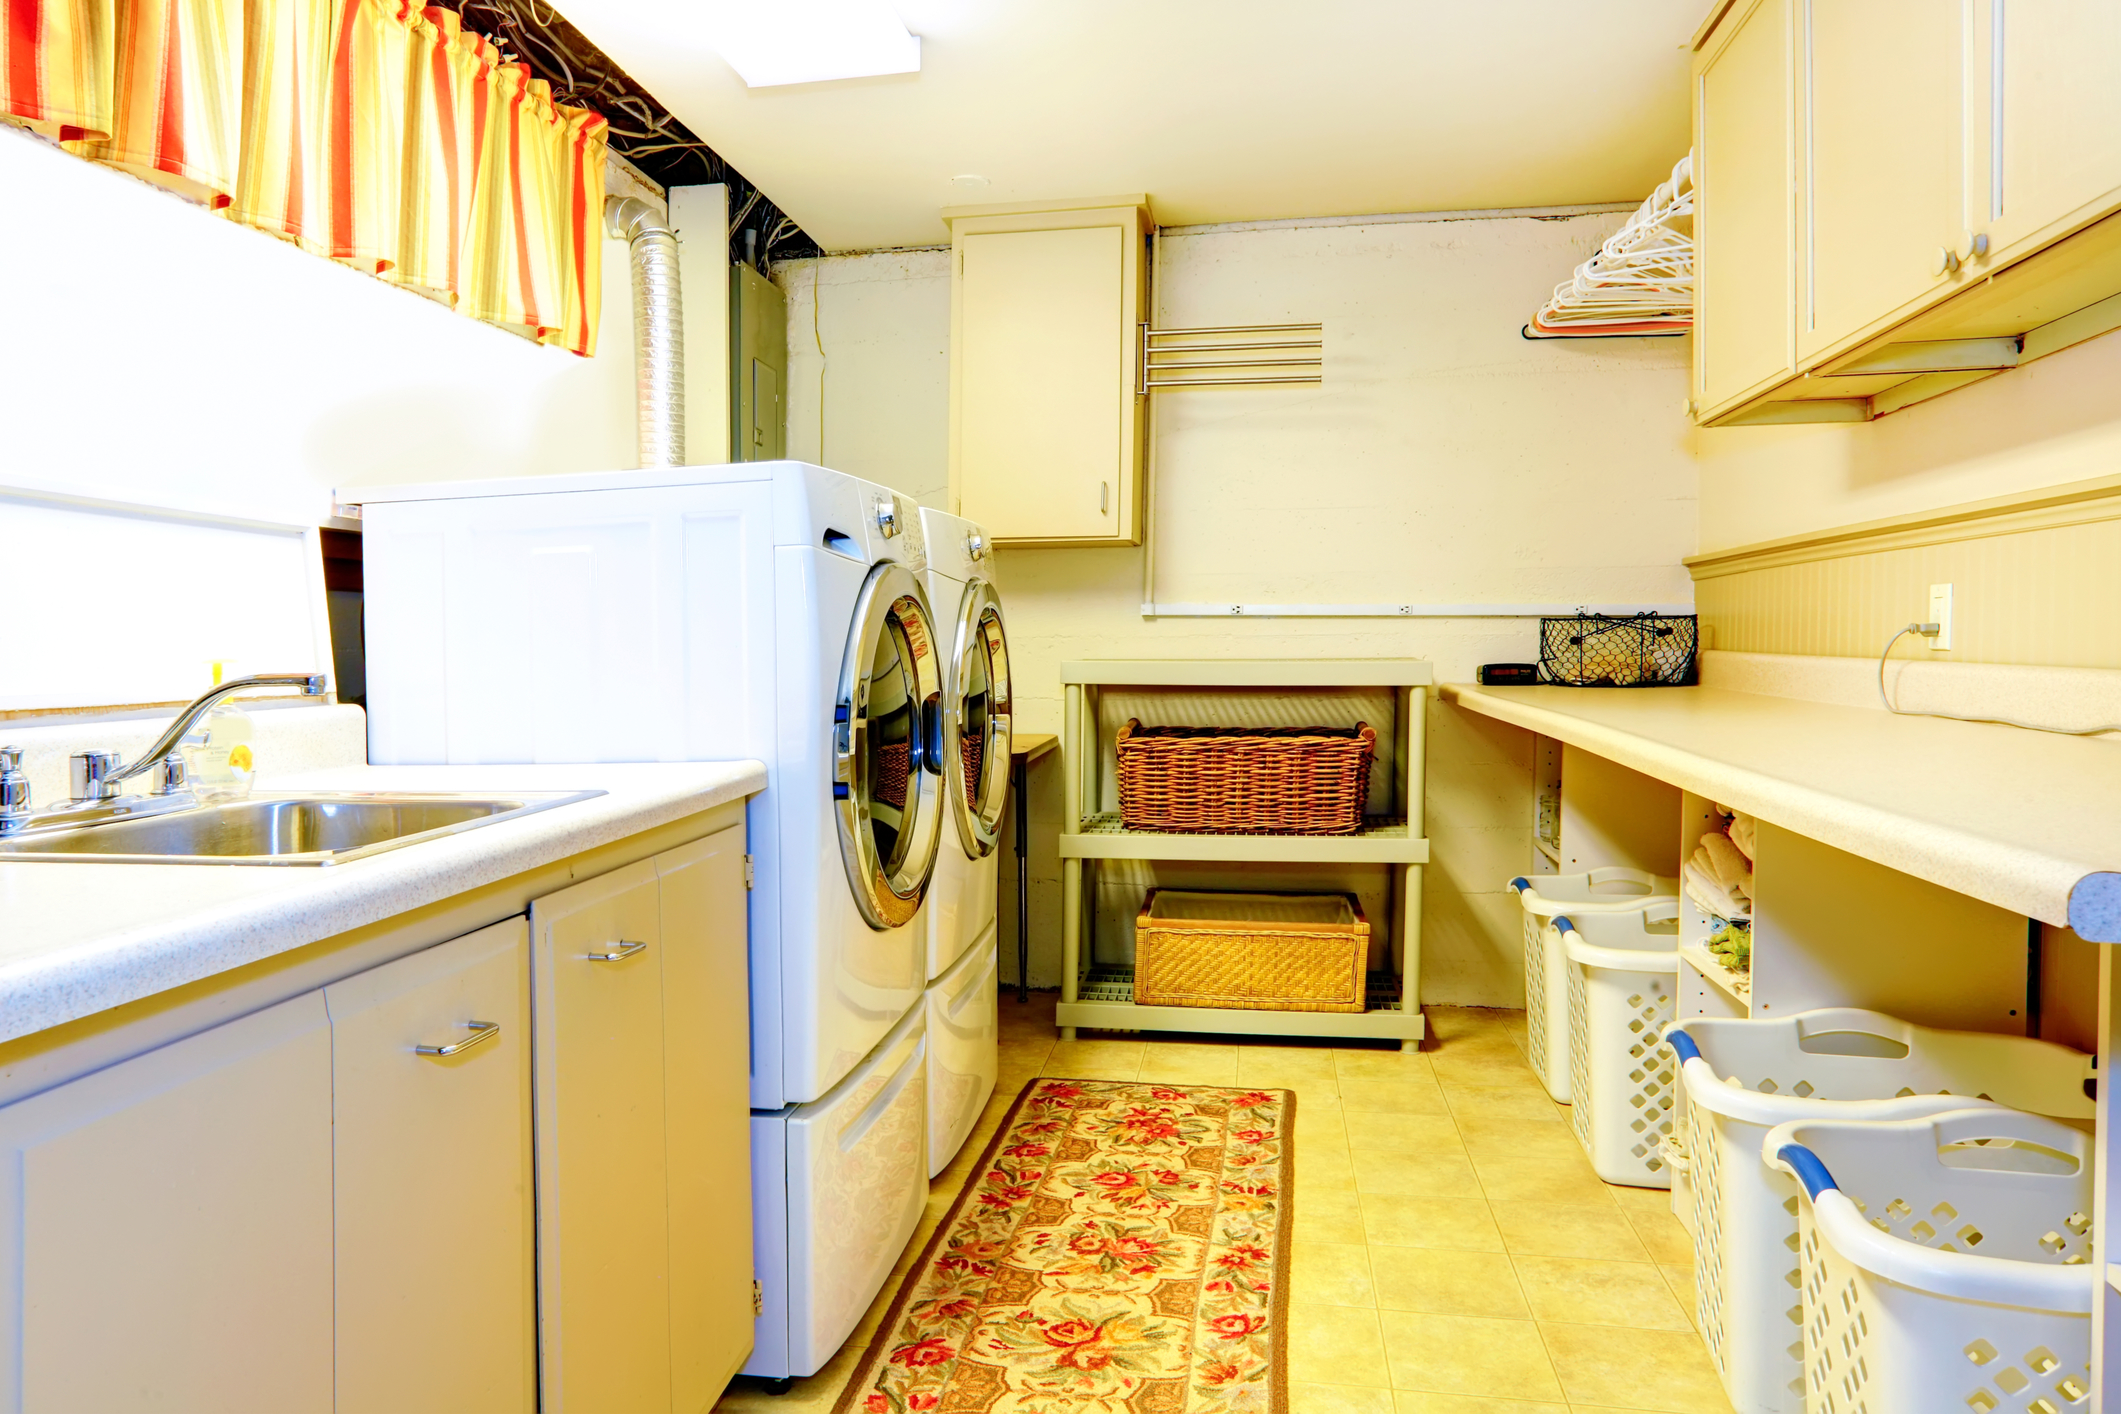 Big old style laundry room